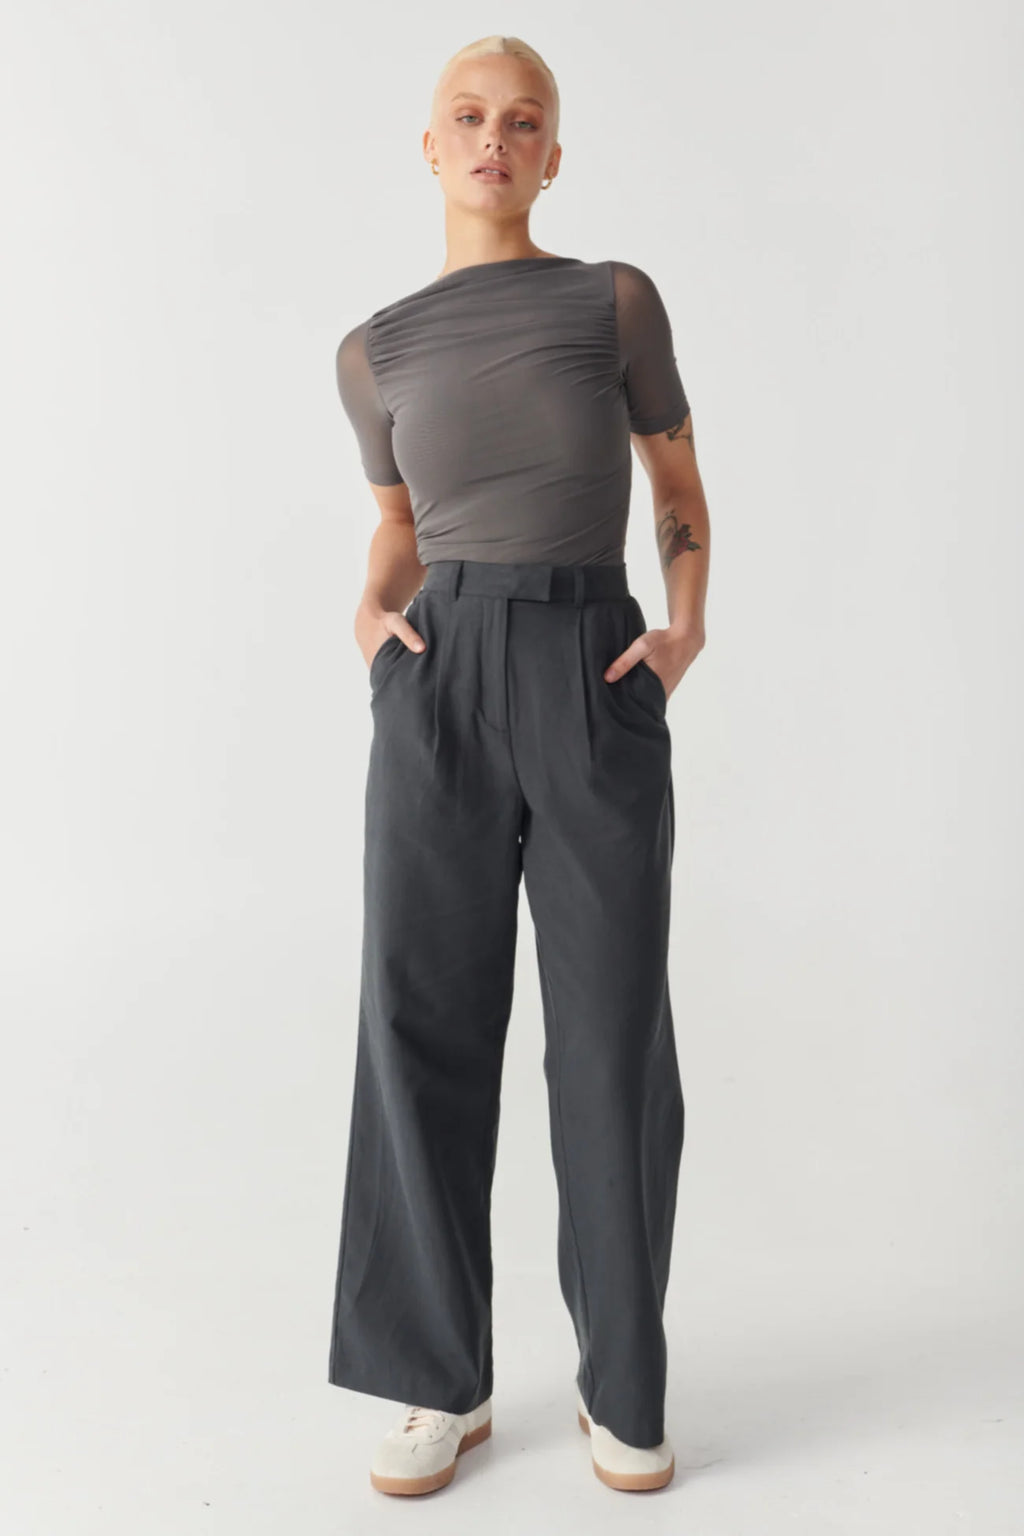 RAEF THE LABEL - Riley Tailored Pant - Charcoal